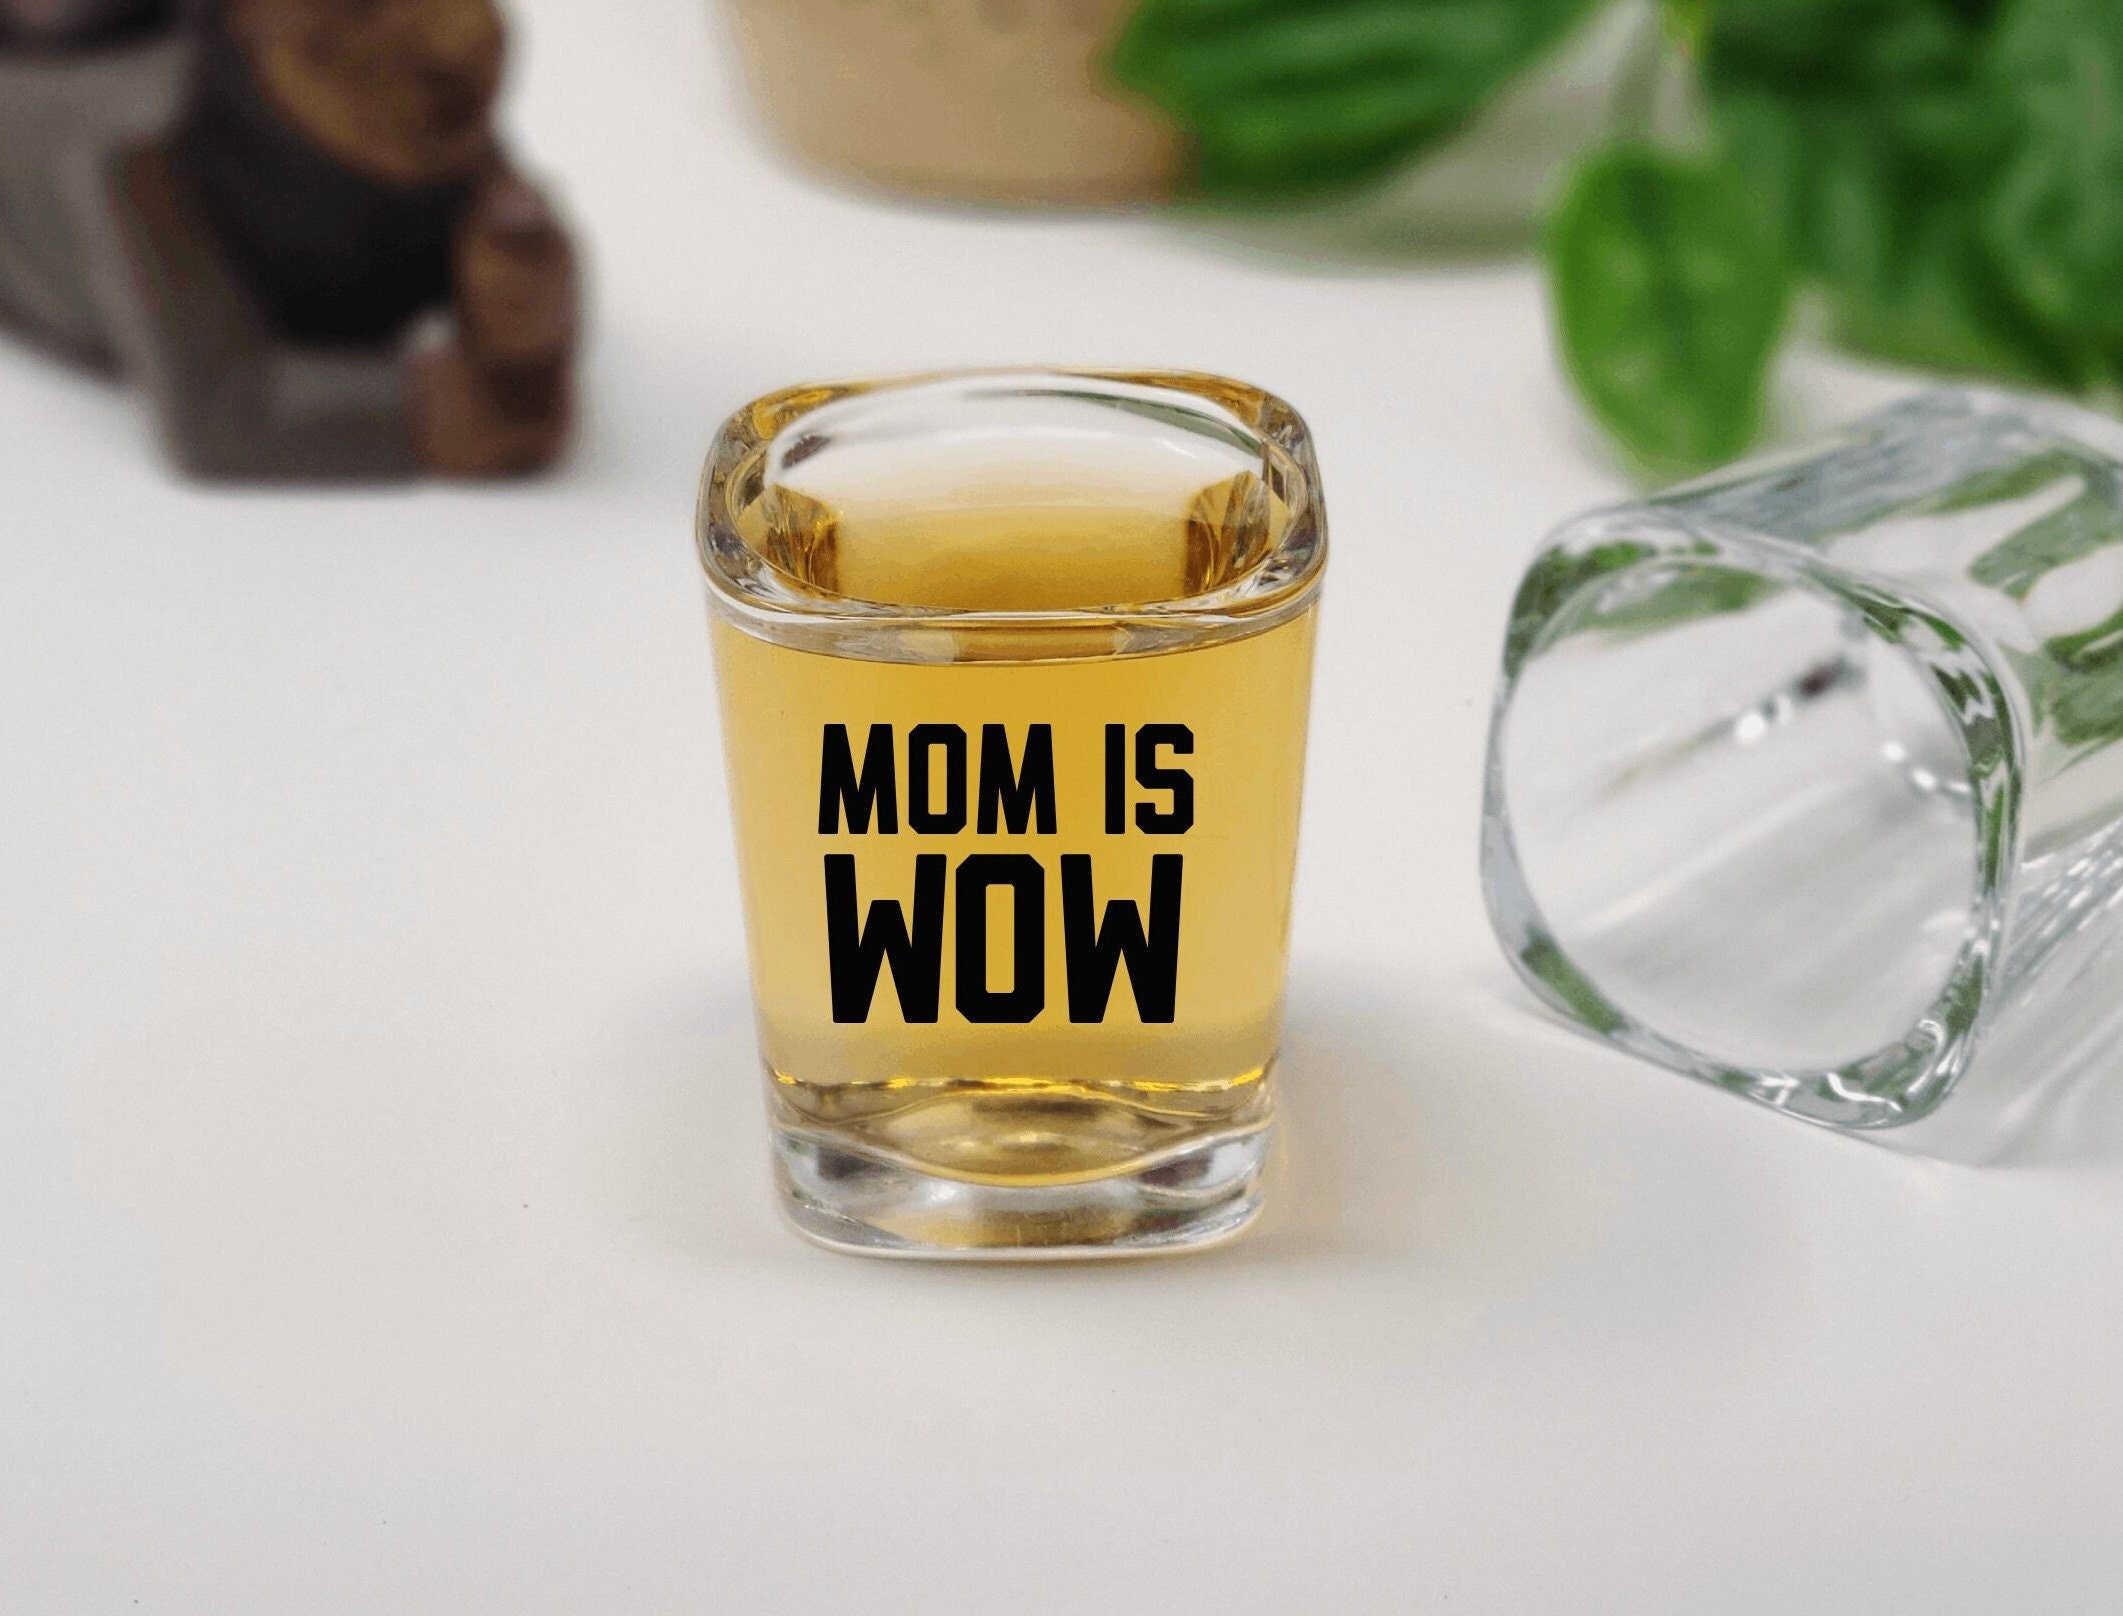 Gifts for Senior Citizens - Gifts for Elderly Men and Women -  Gifts for Grandfather and Grandmother - Gifts for Older Men and Women -  White Shot Glass: Shot Glasses